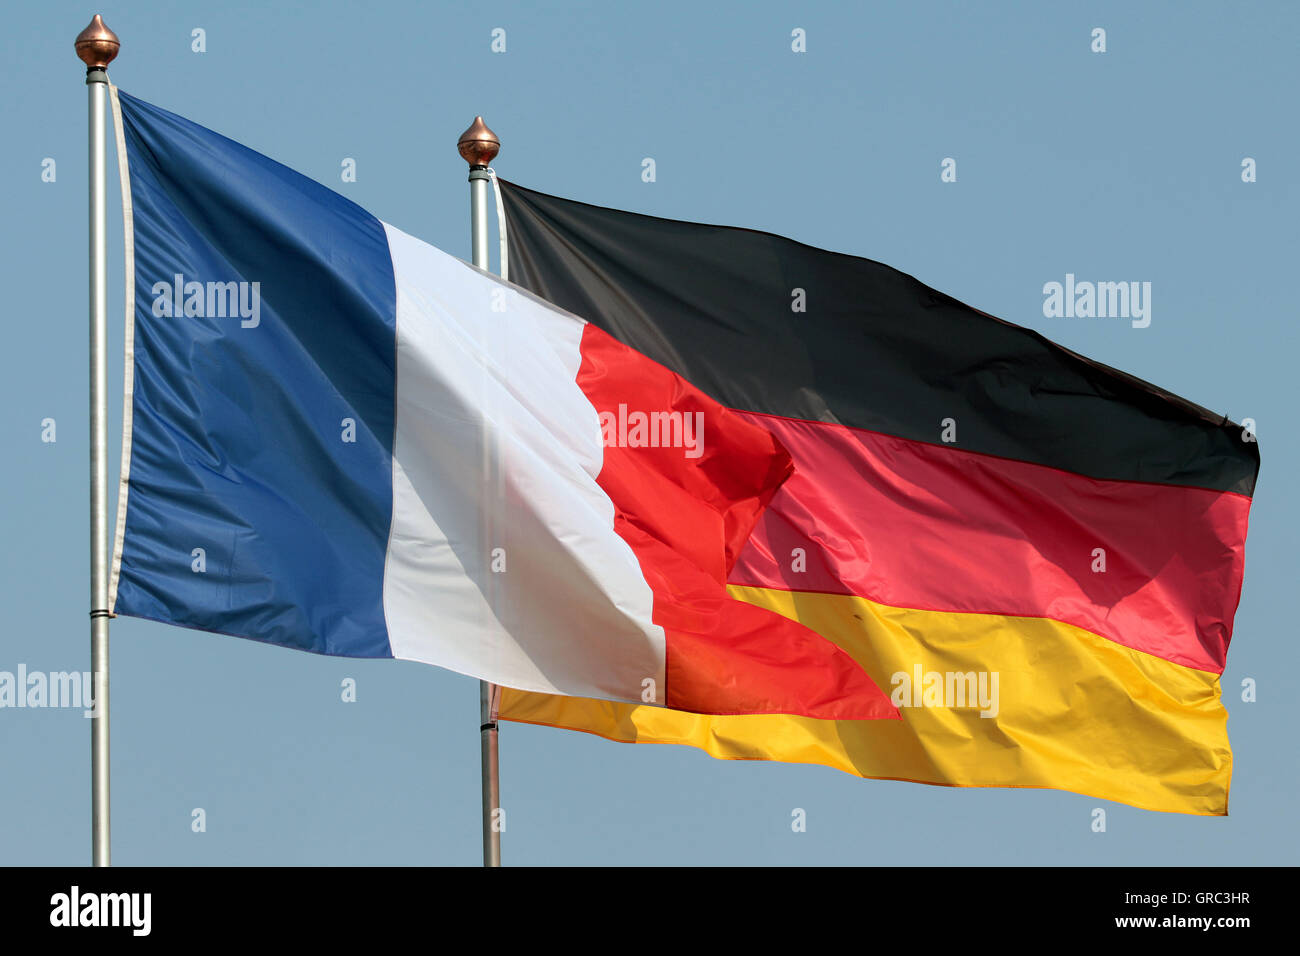 Flags Of France And Germany Blowing In The Wind Stock Photo